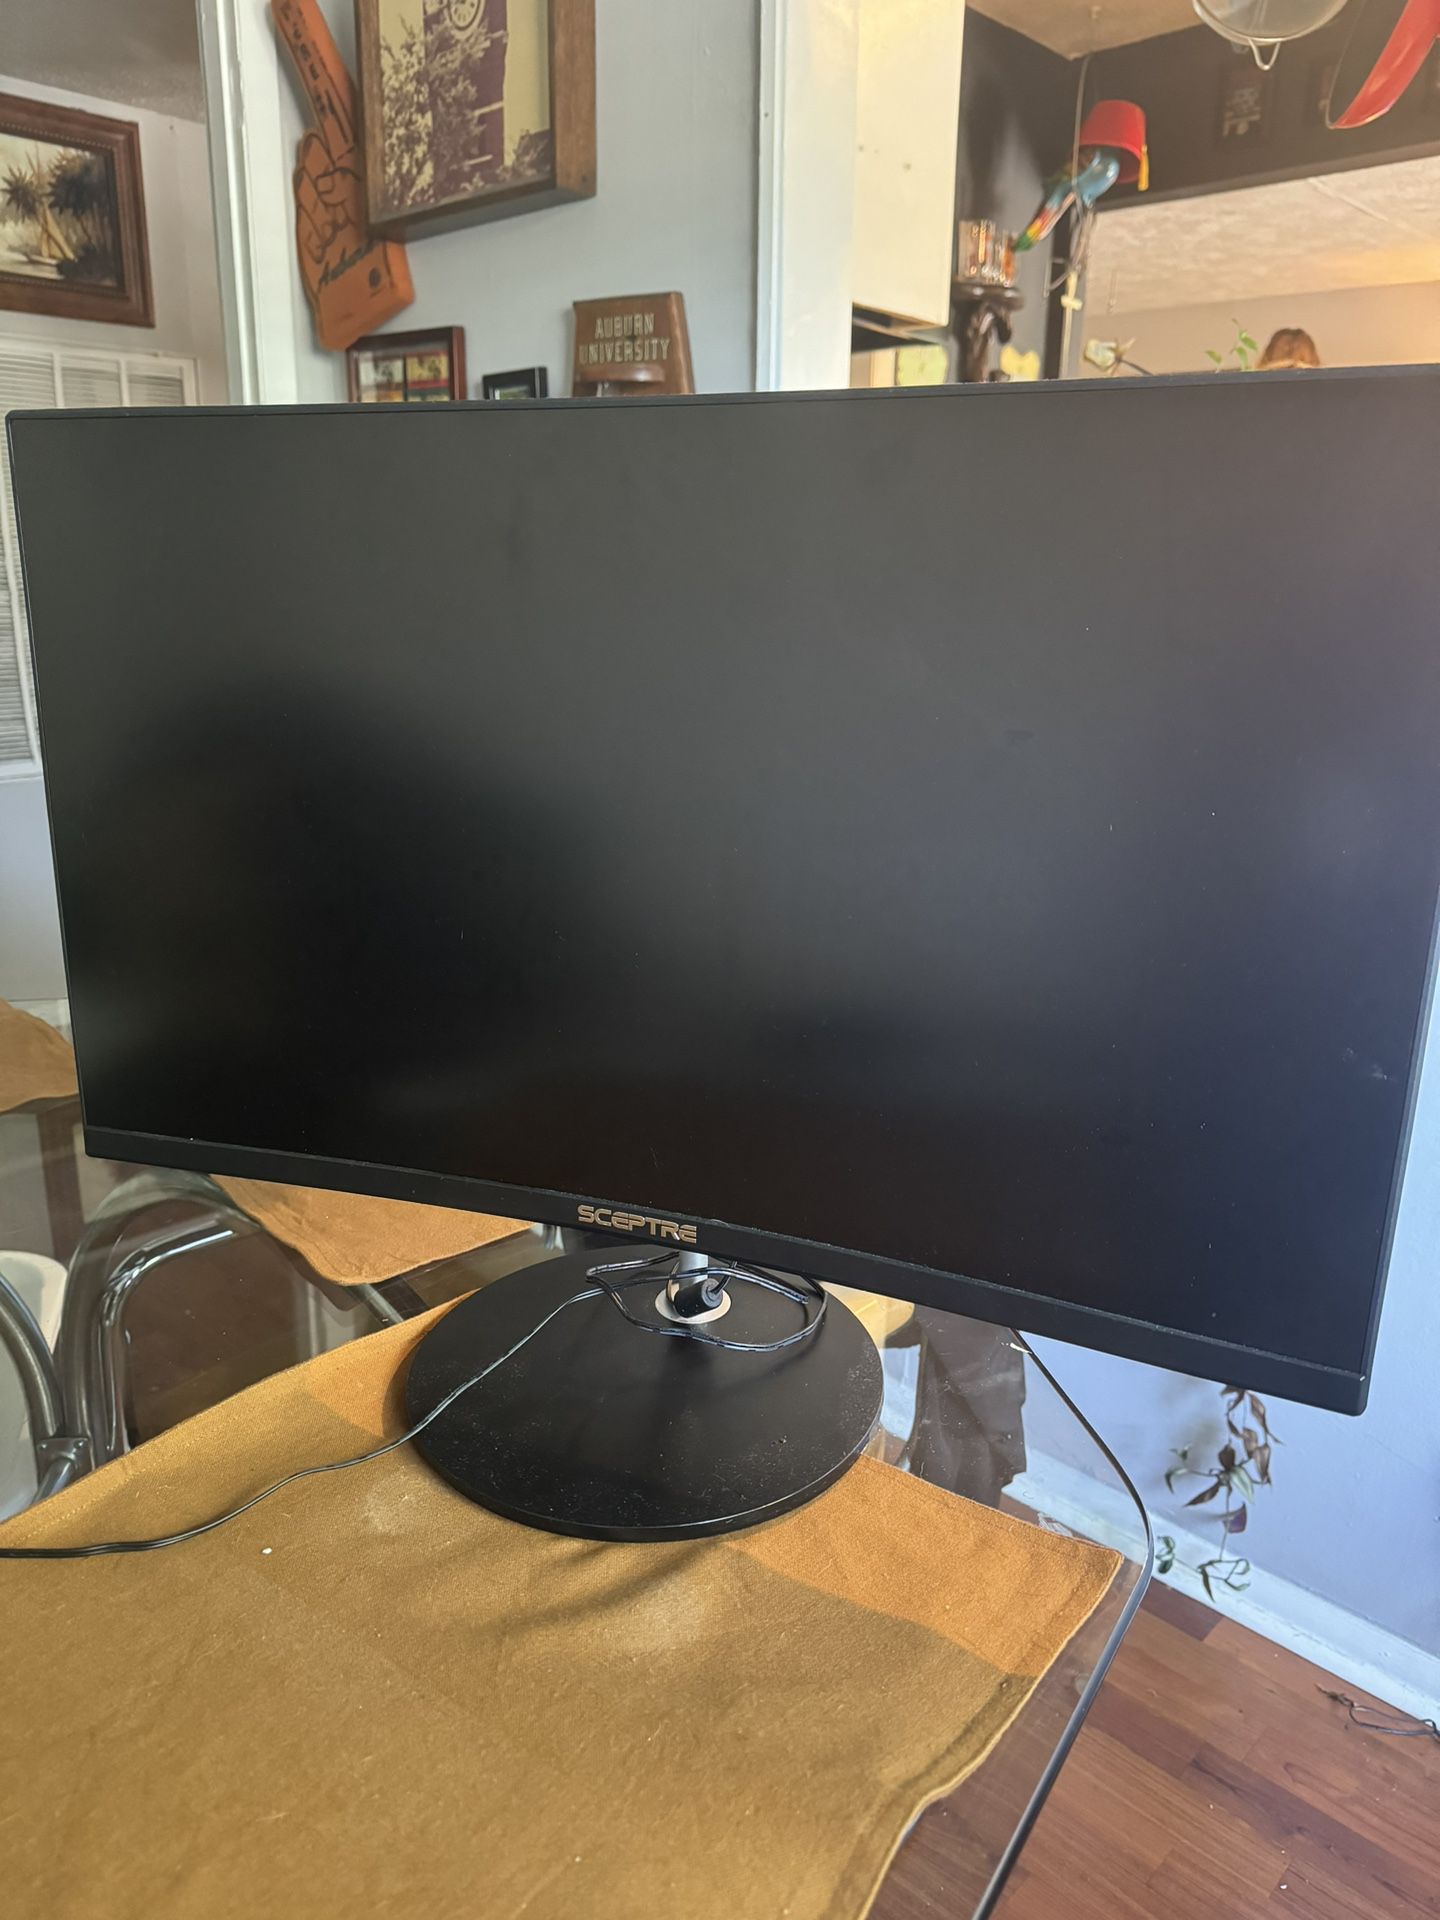 Spectre 27” Curved Monitor 75hz 1080p